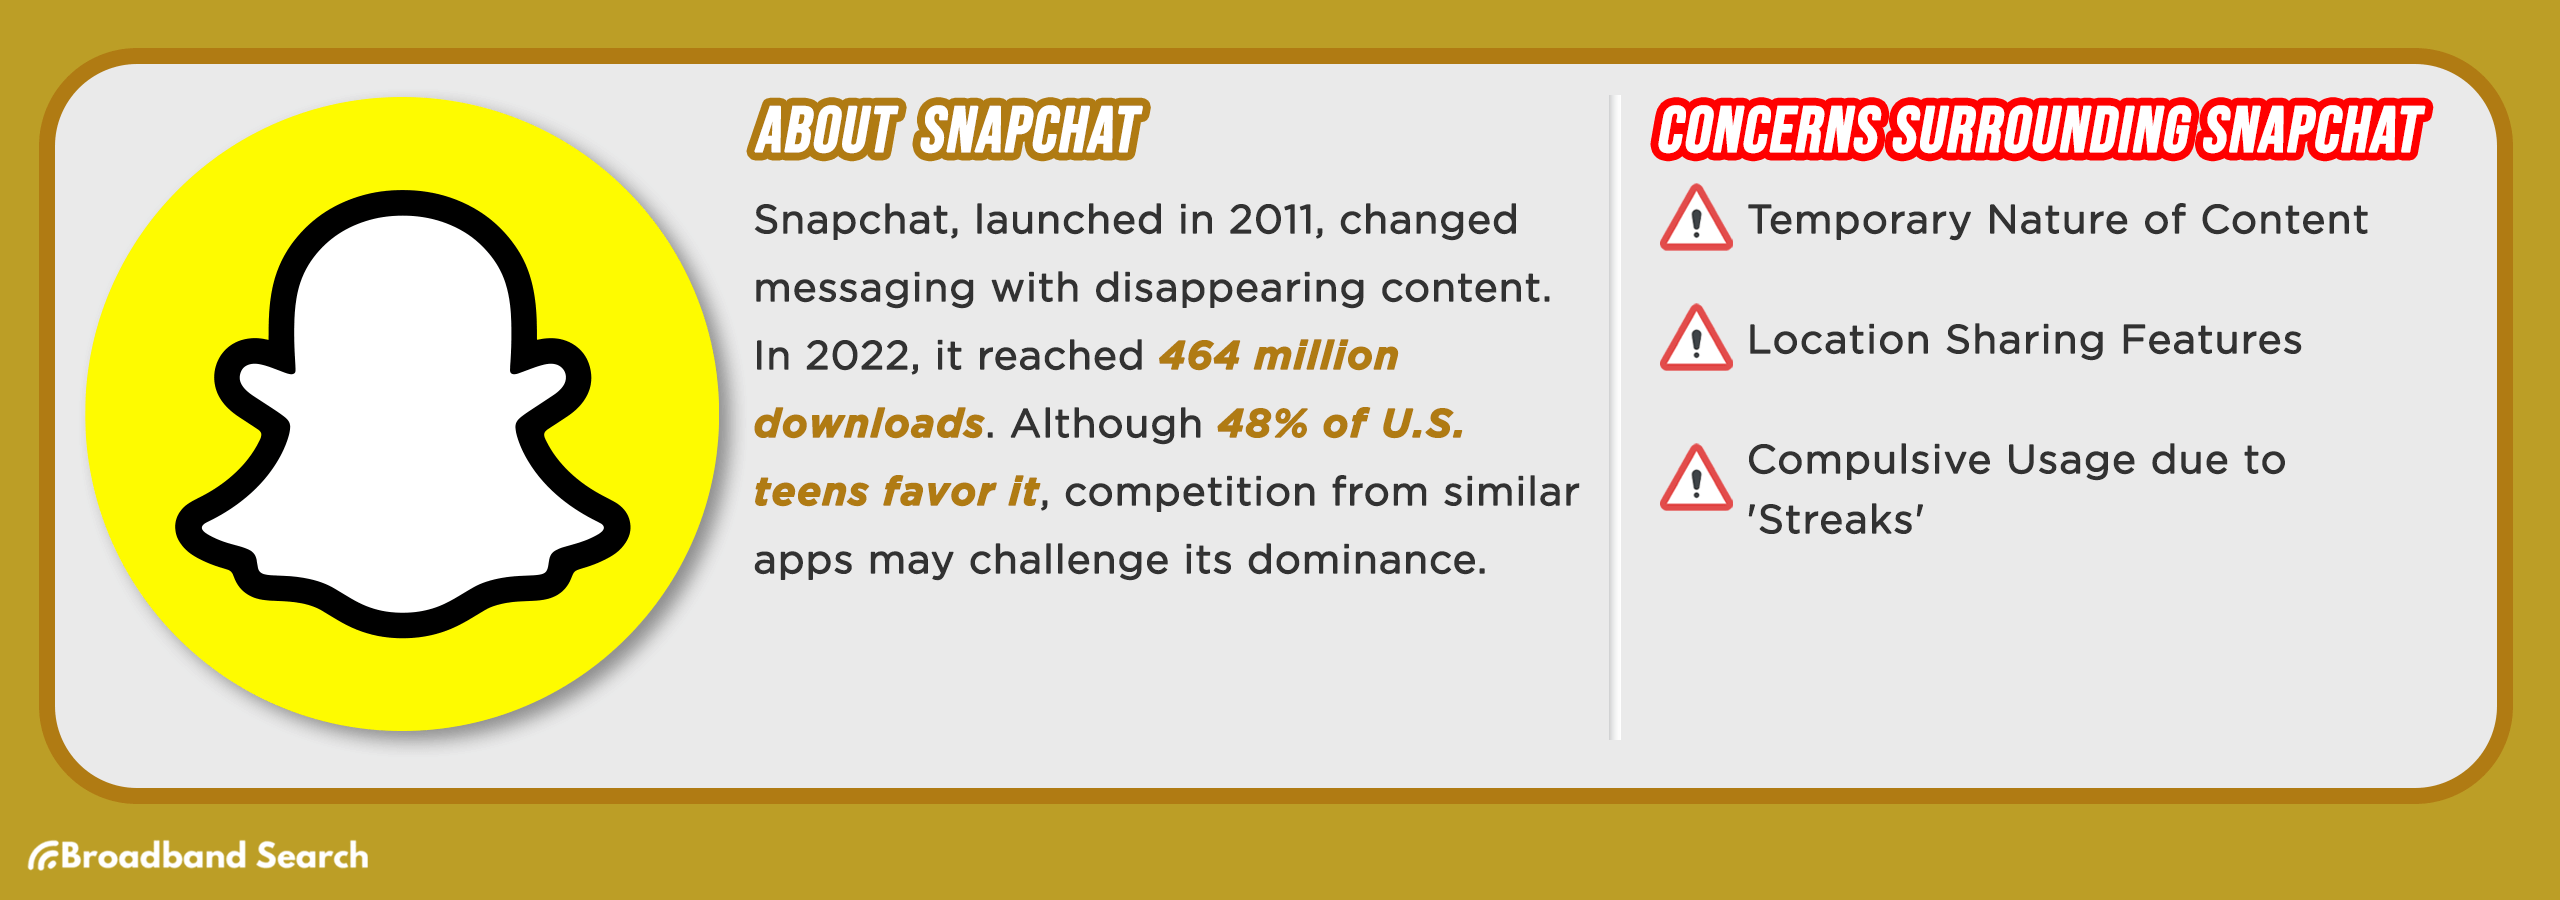 Statistics on Snapchat and concerns surrounding usage of the social media app